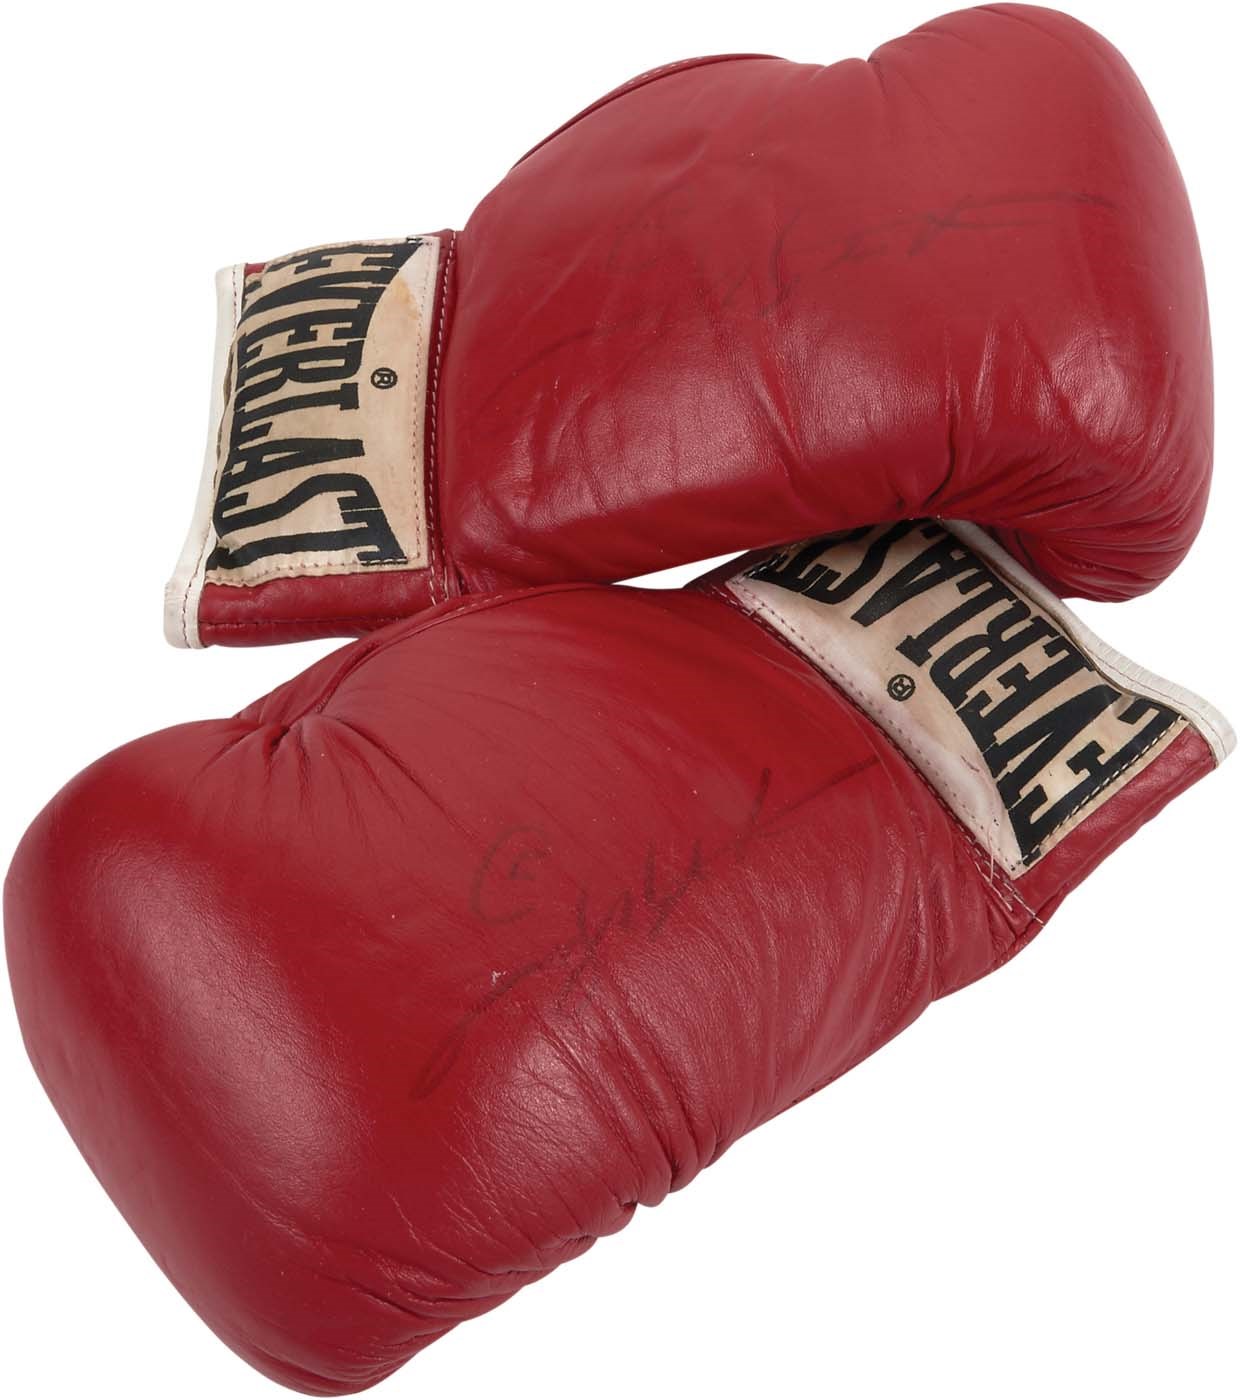 1977 Sugar Ray Leonard Pro Debut Signed Fight Gloves (Photo-Matched)